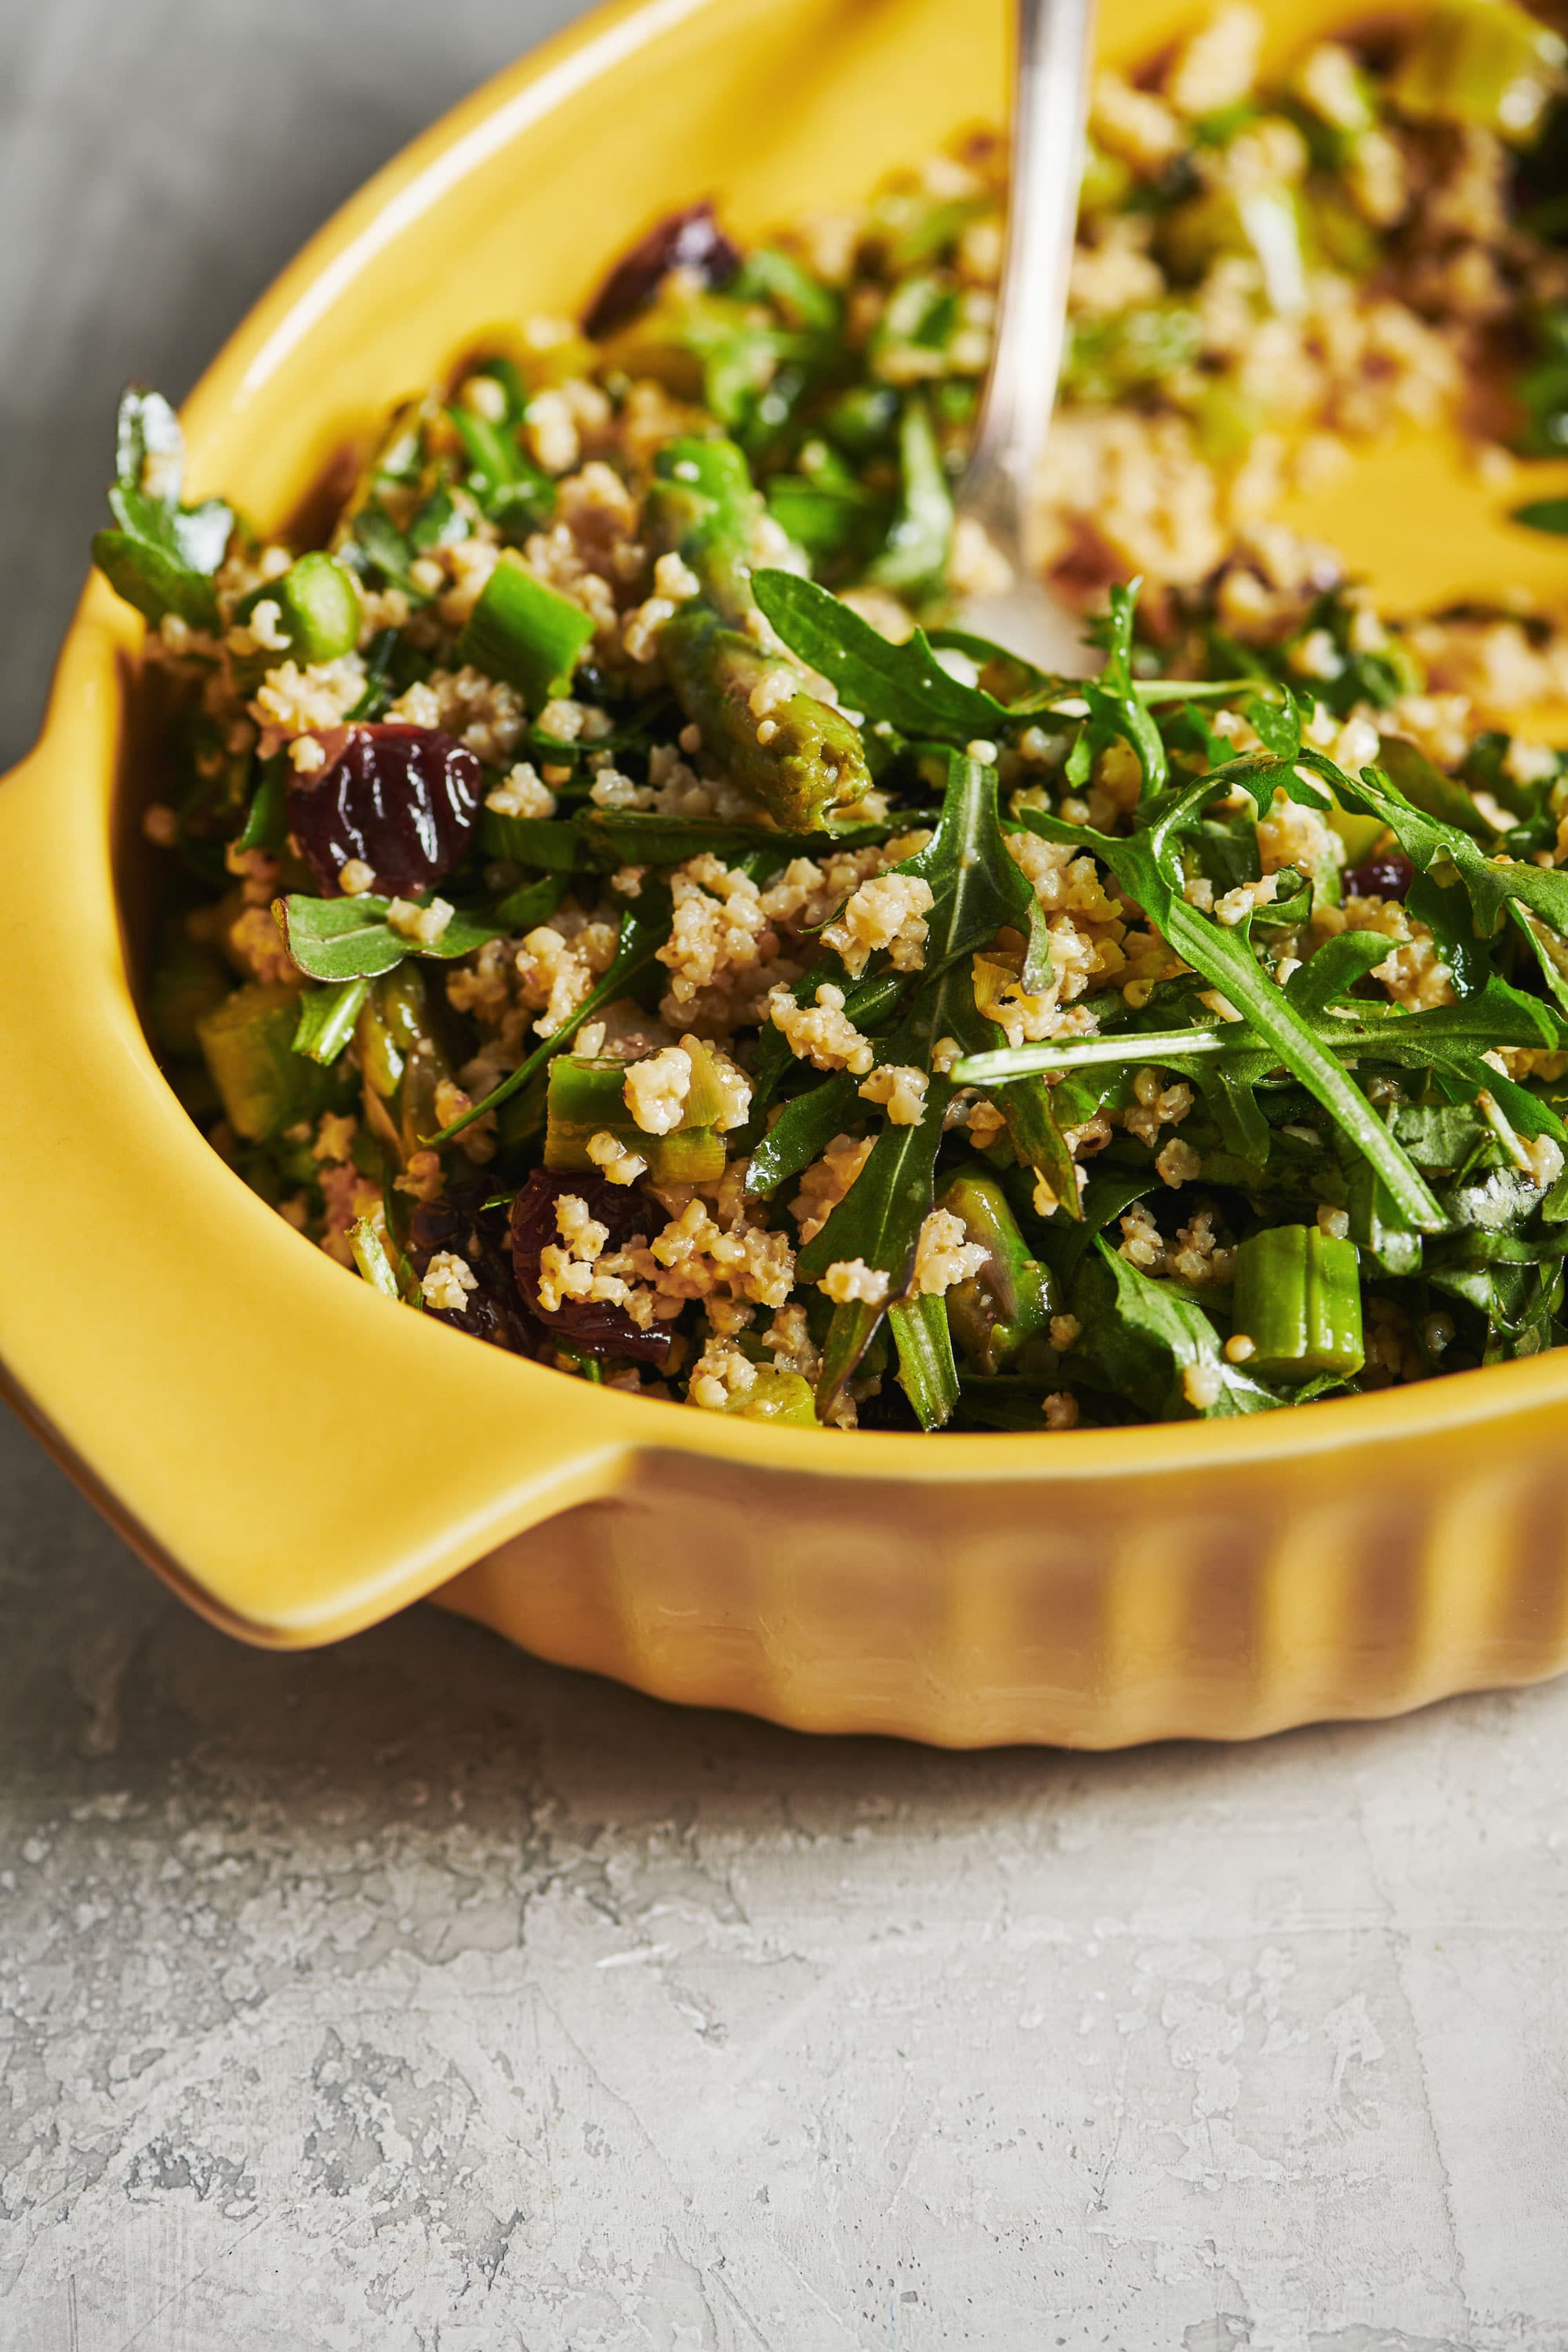 Millet and Greens Salad in a yellow bowl.